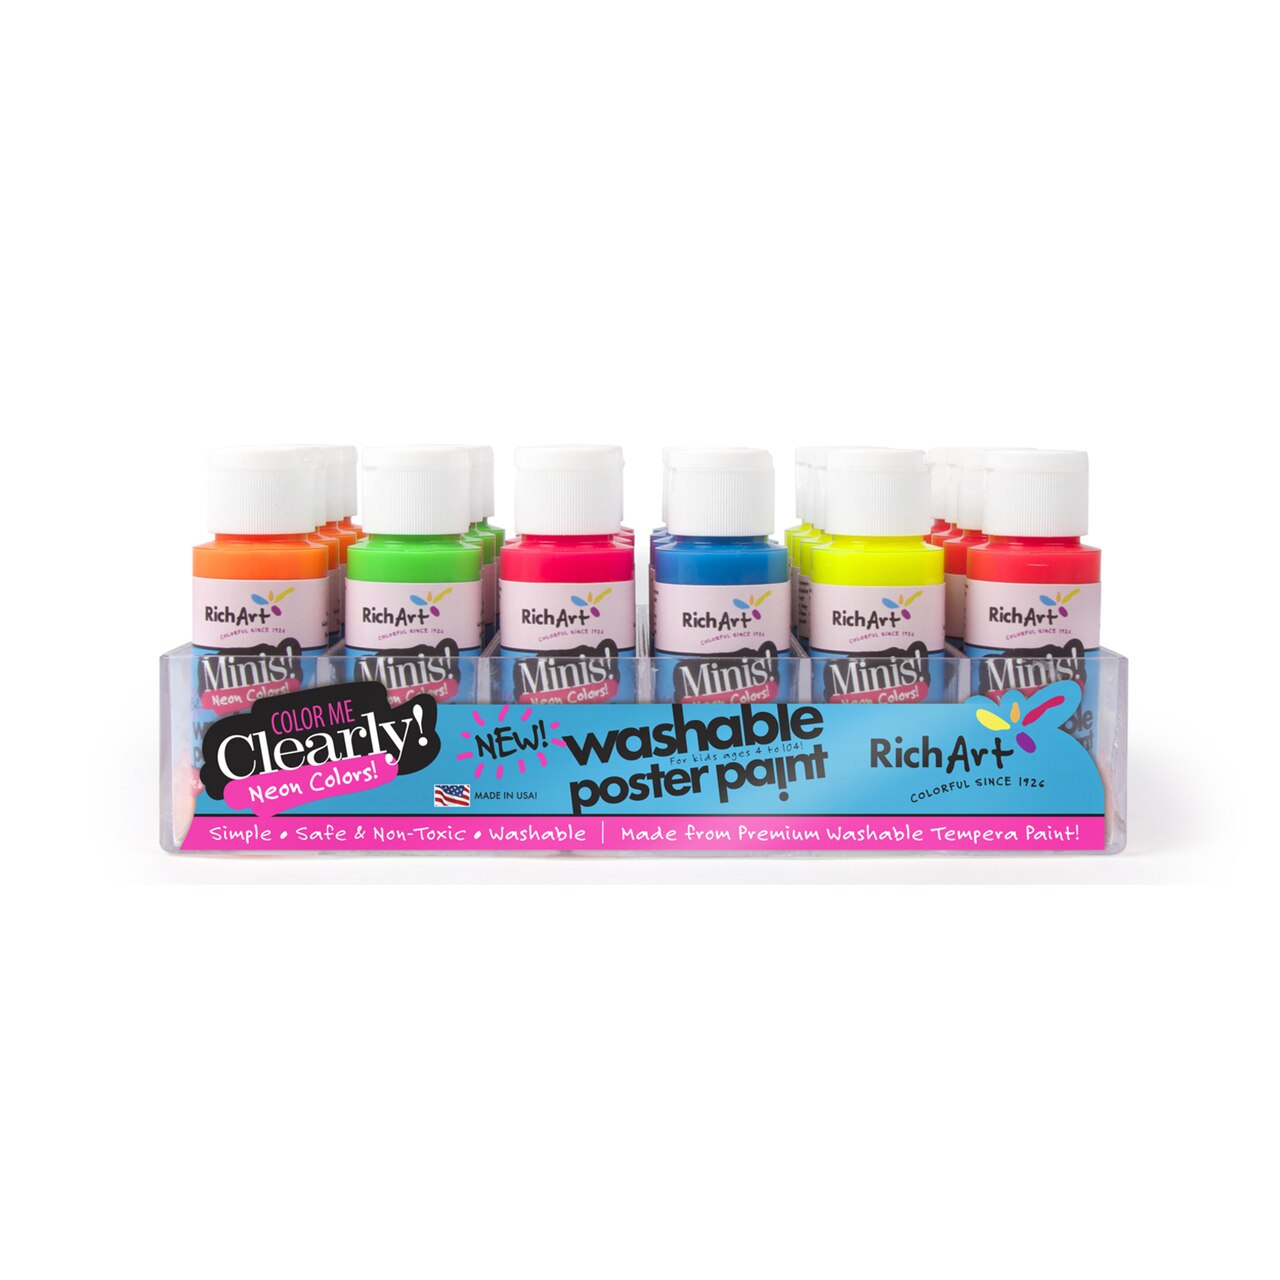 Colorations Washable Non Toxic Simply Tempera Paint For Kids